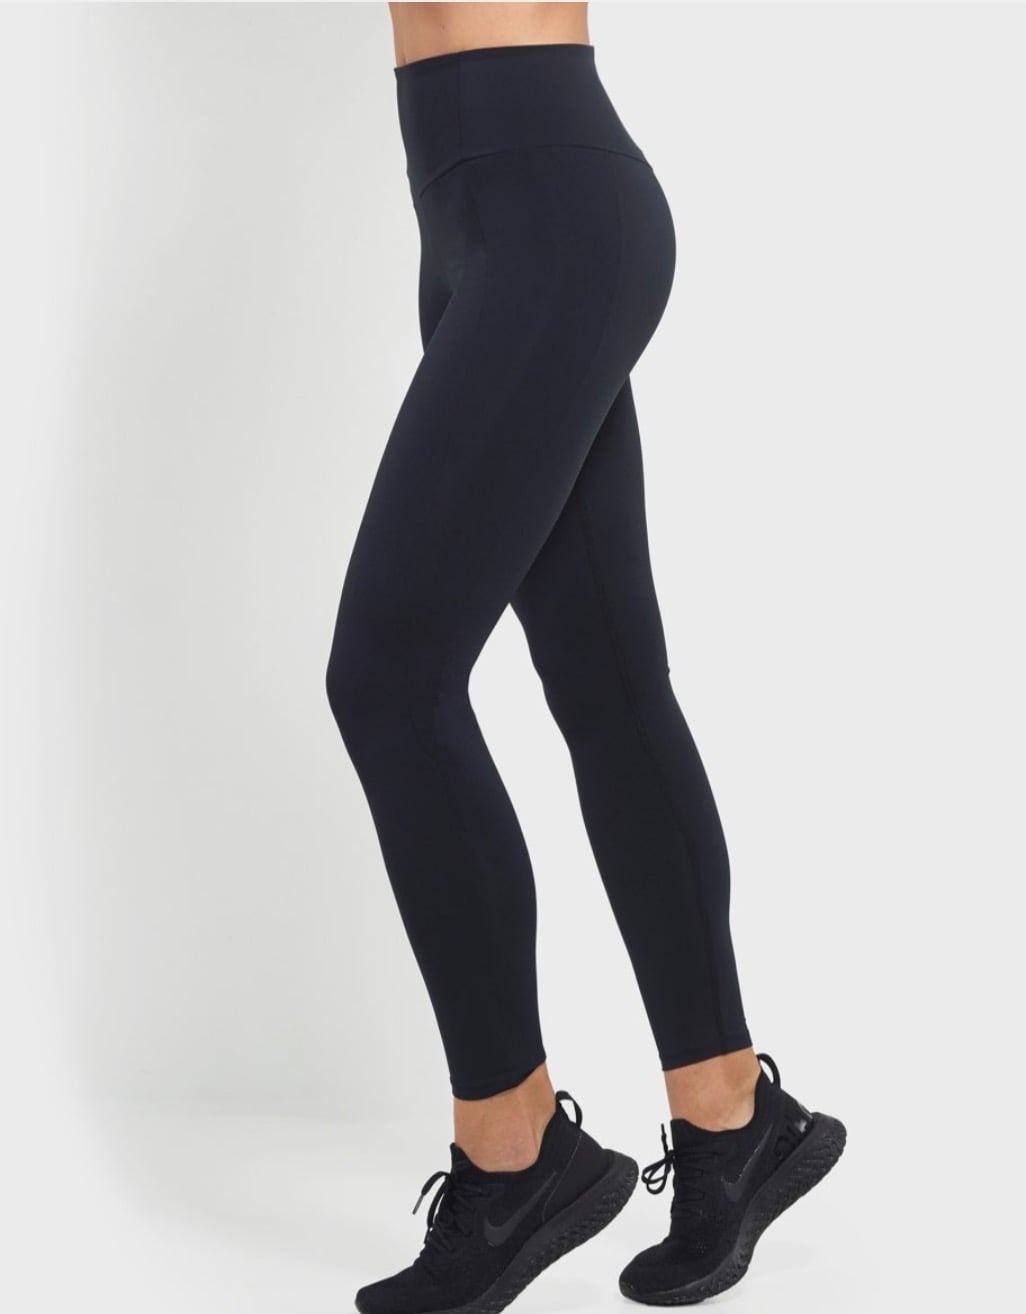 The Best Squat-Proof Gym Leggings at Every Price Point